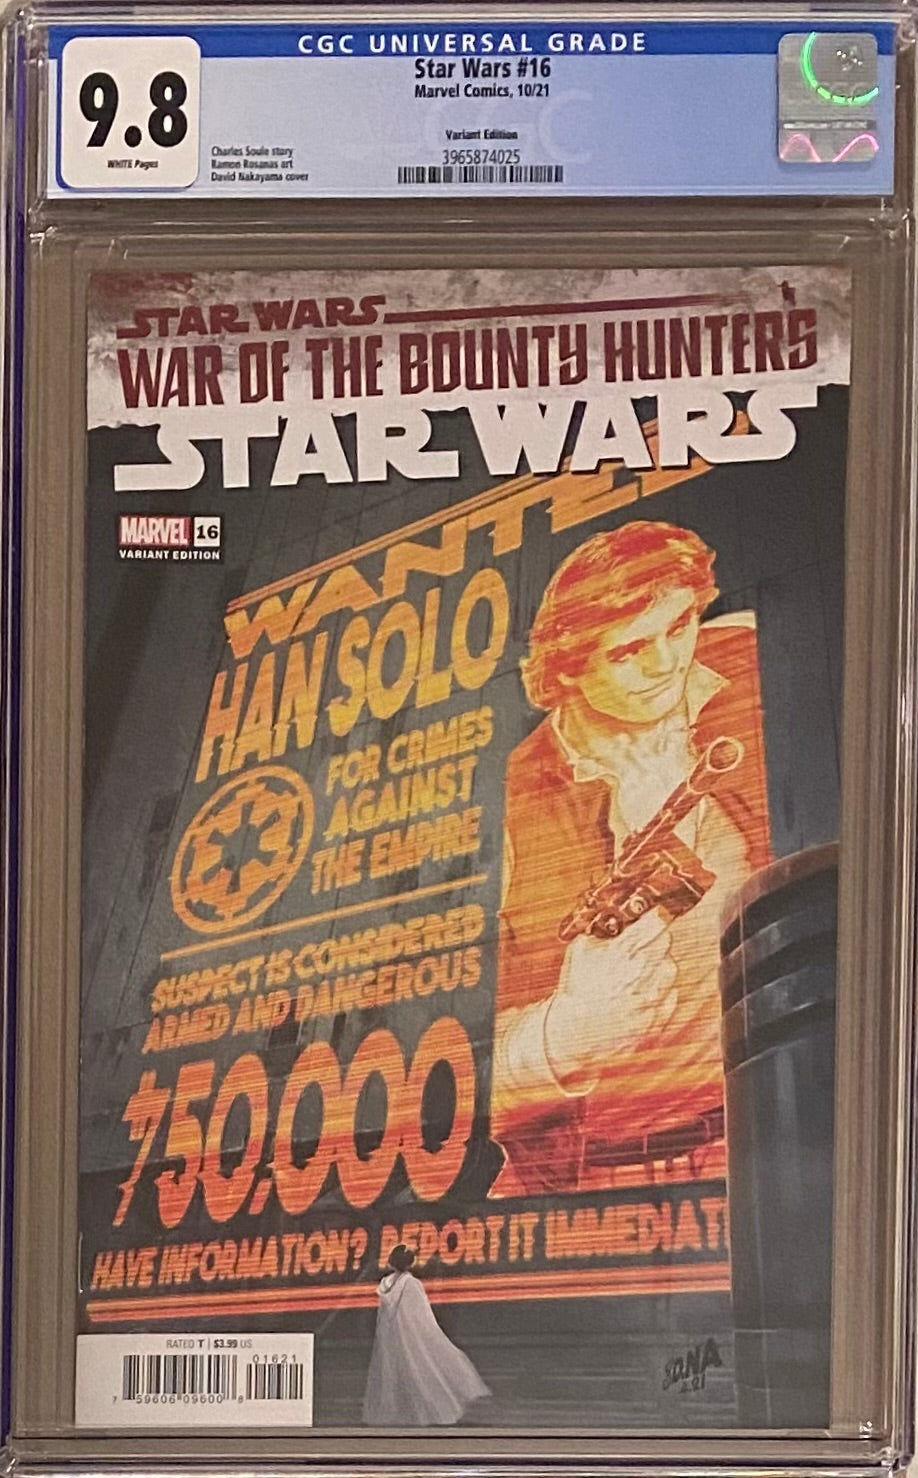 Star Wars #16 Wanted Poster Variant CGC 9.8 - War of the Bounty Hunters